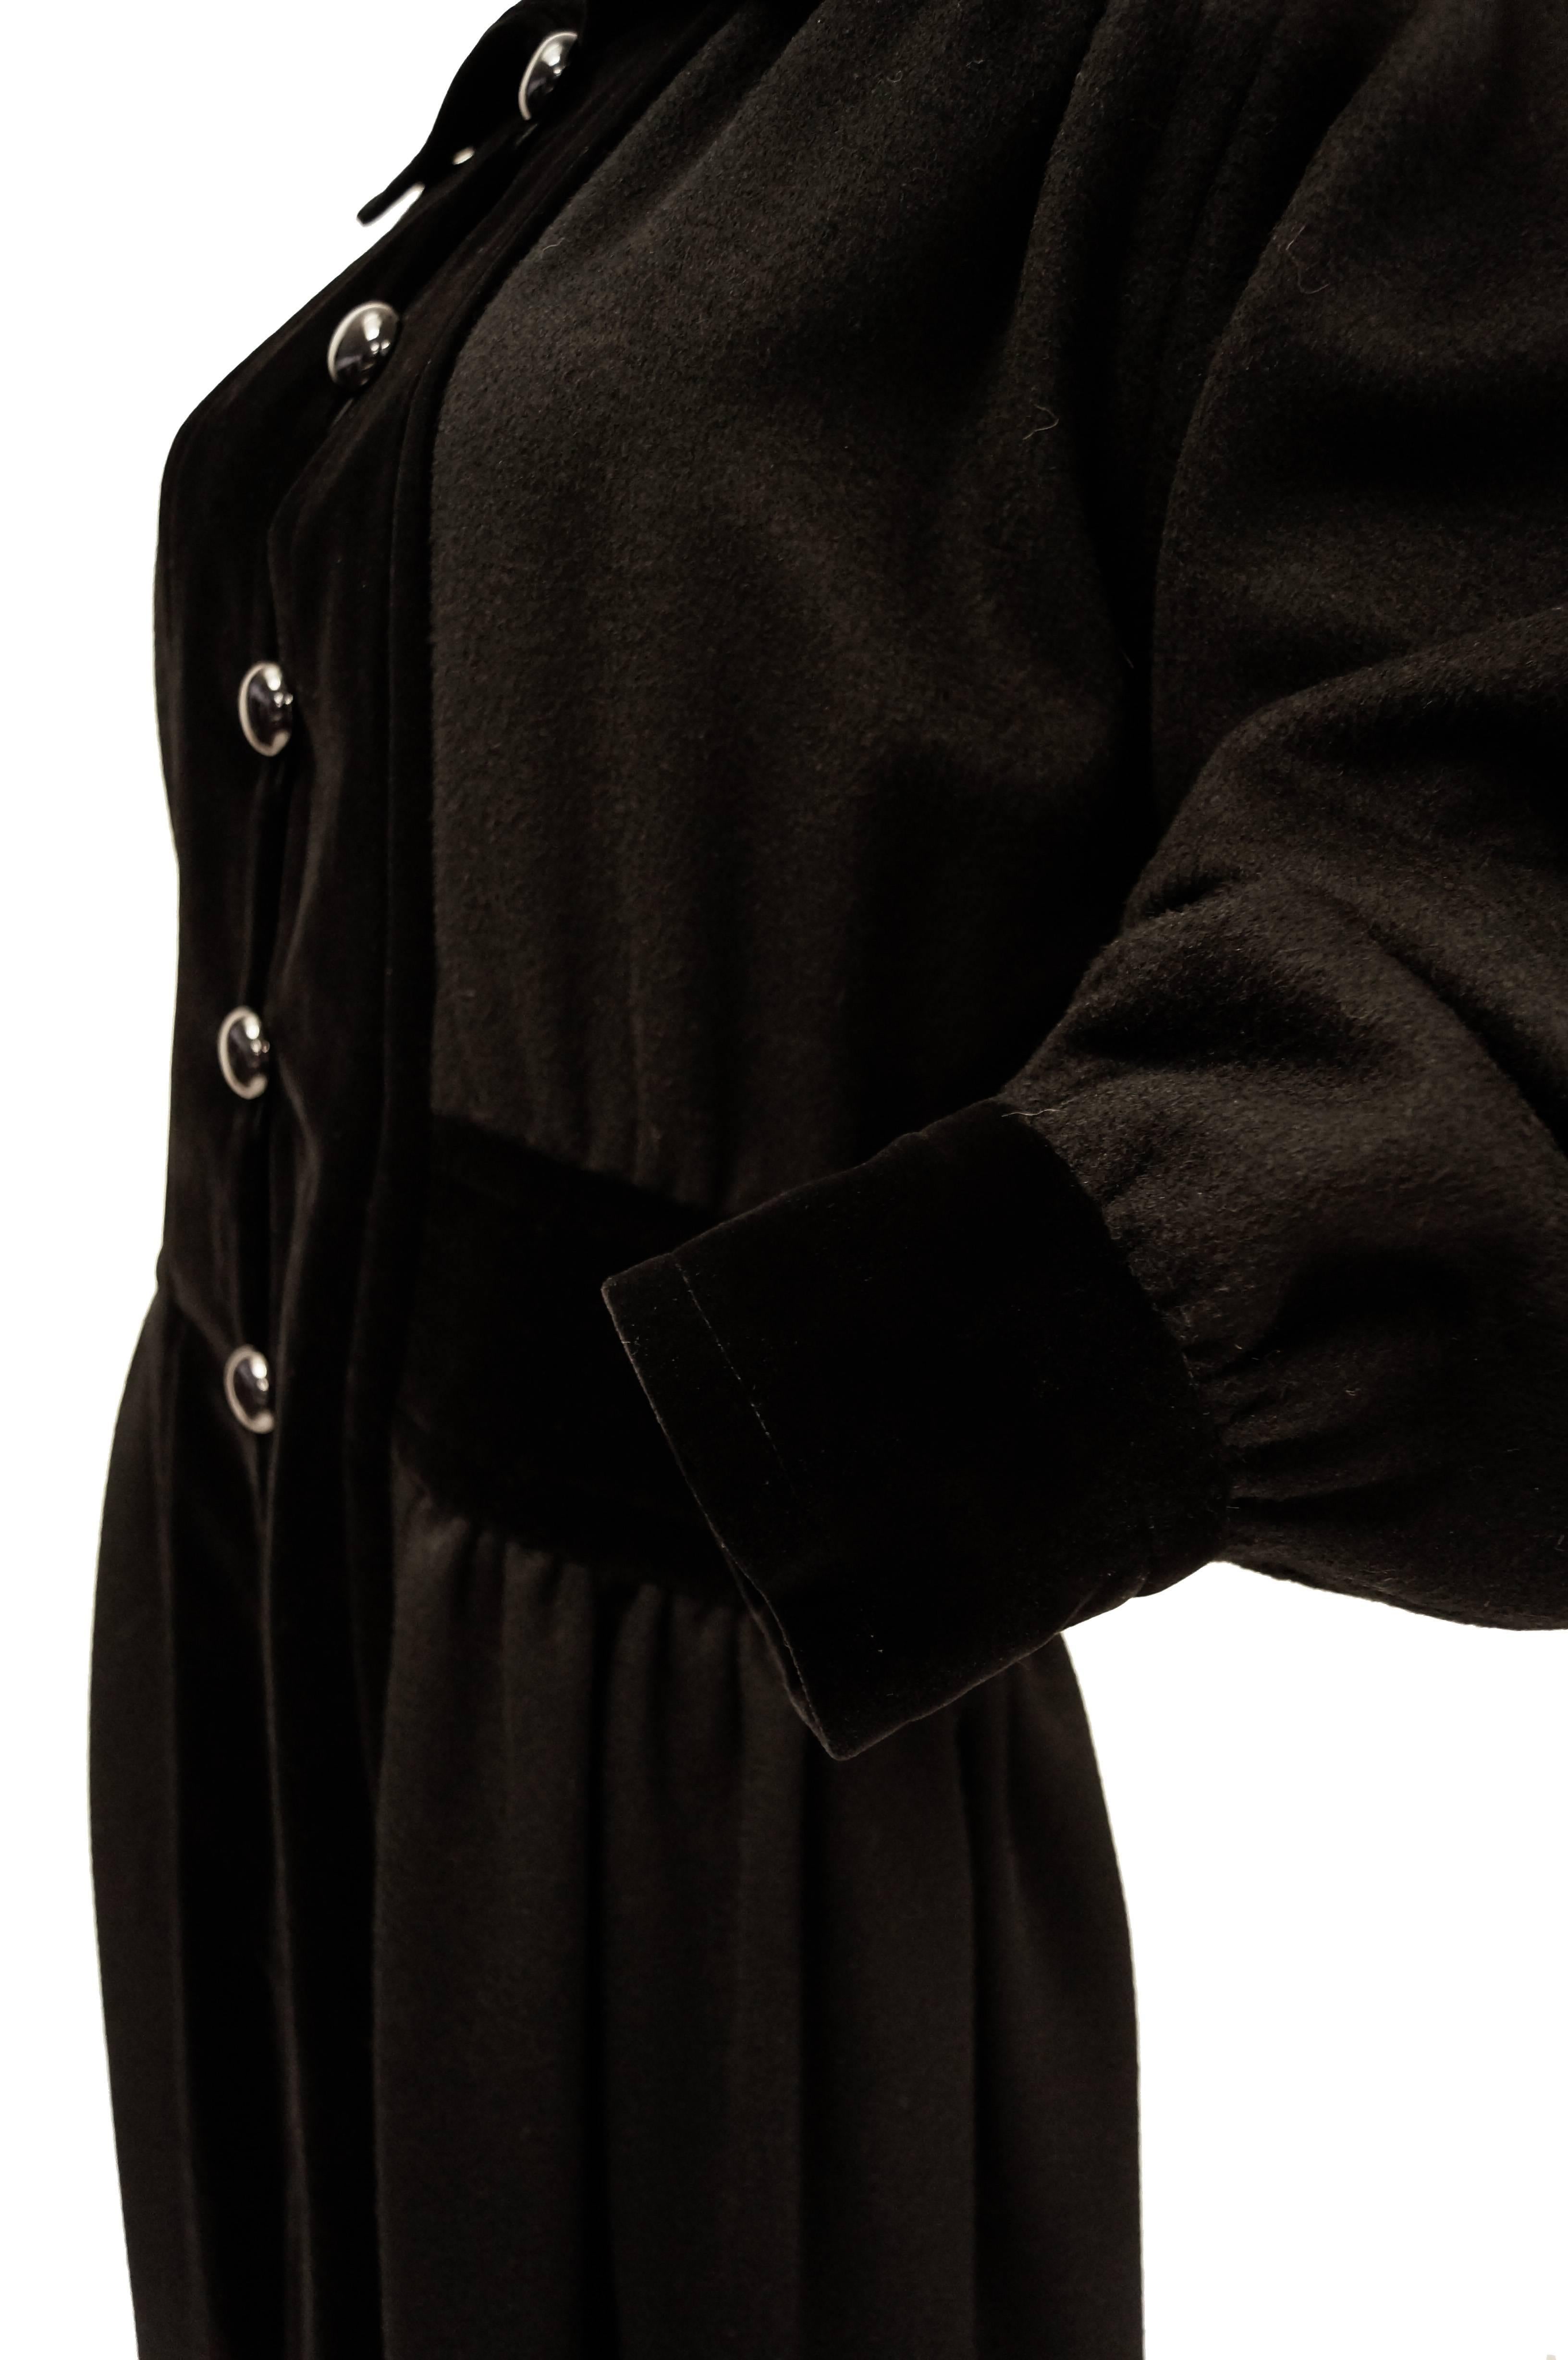 Yves Saint Laurent Russian Collection Wool with Velvet Black Coat L/XL, 1970s  For Sale 2